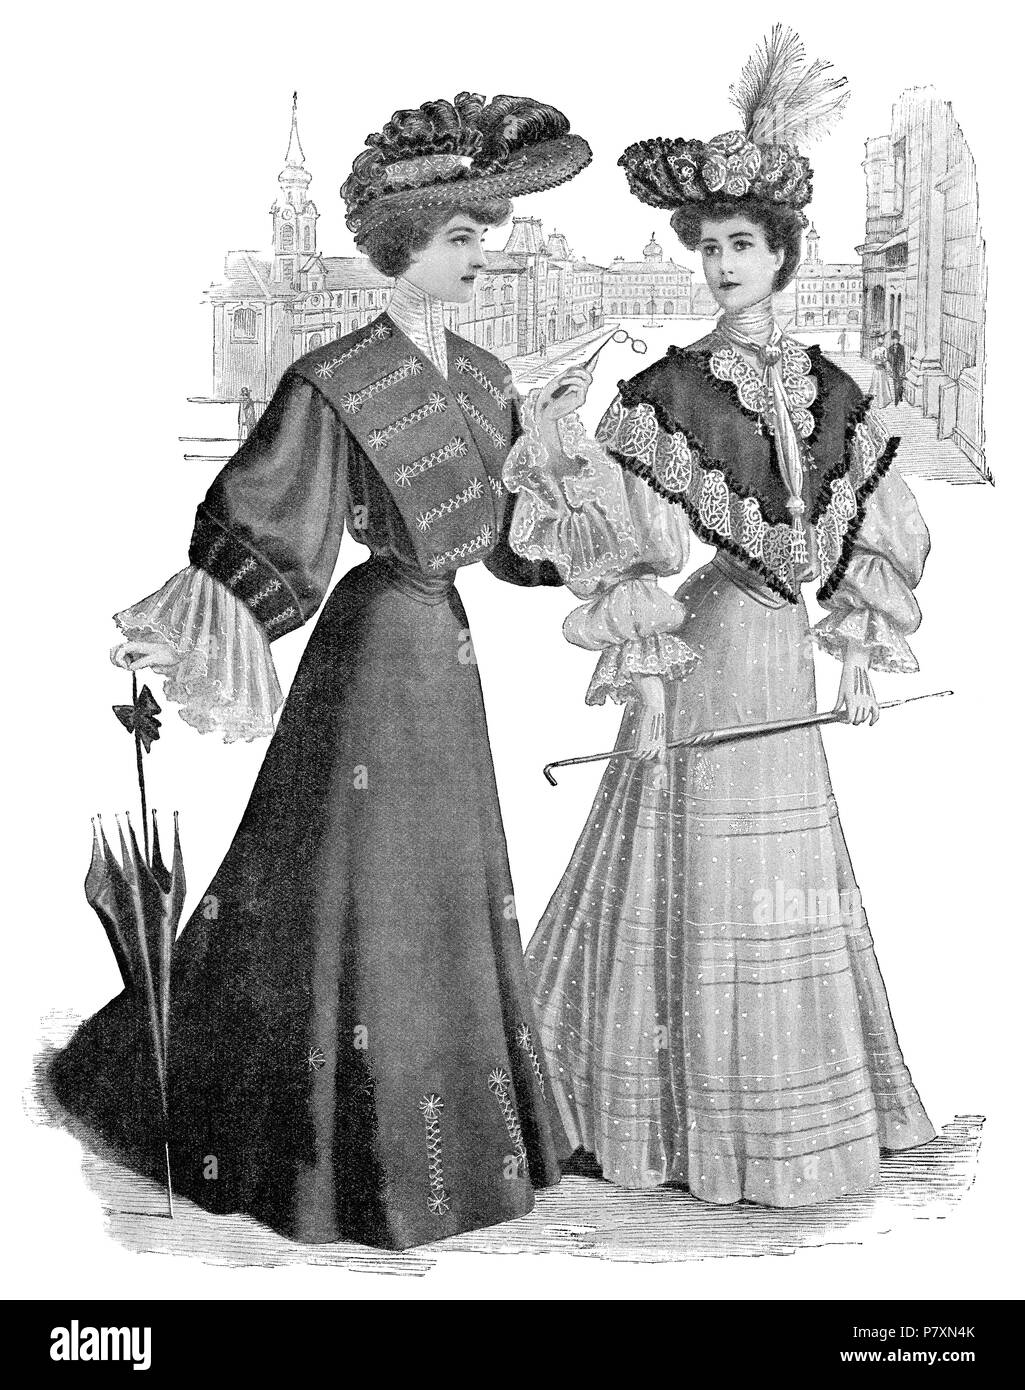 1904 vintage fashion illustration of two Edwardian ladies in day dresses.  From The Girl's Own Paper, 30th July 1904 Stock Photo - Alamy